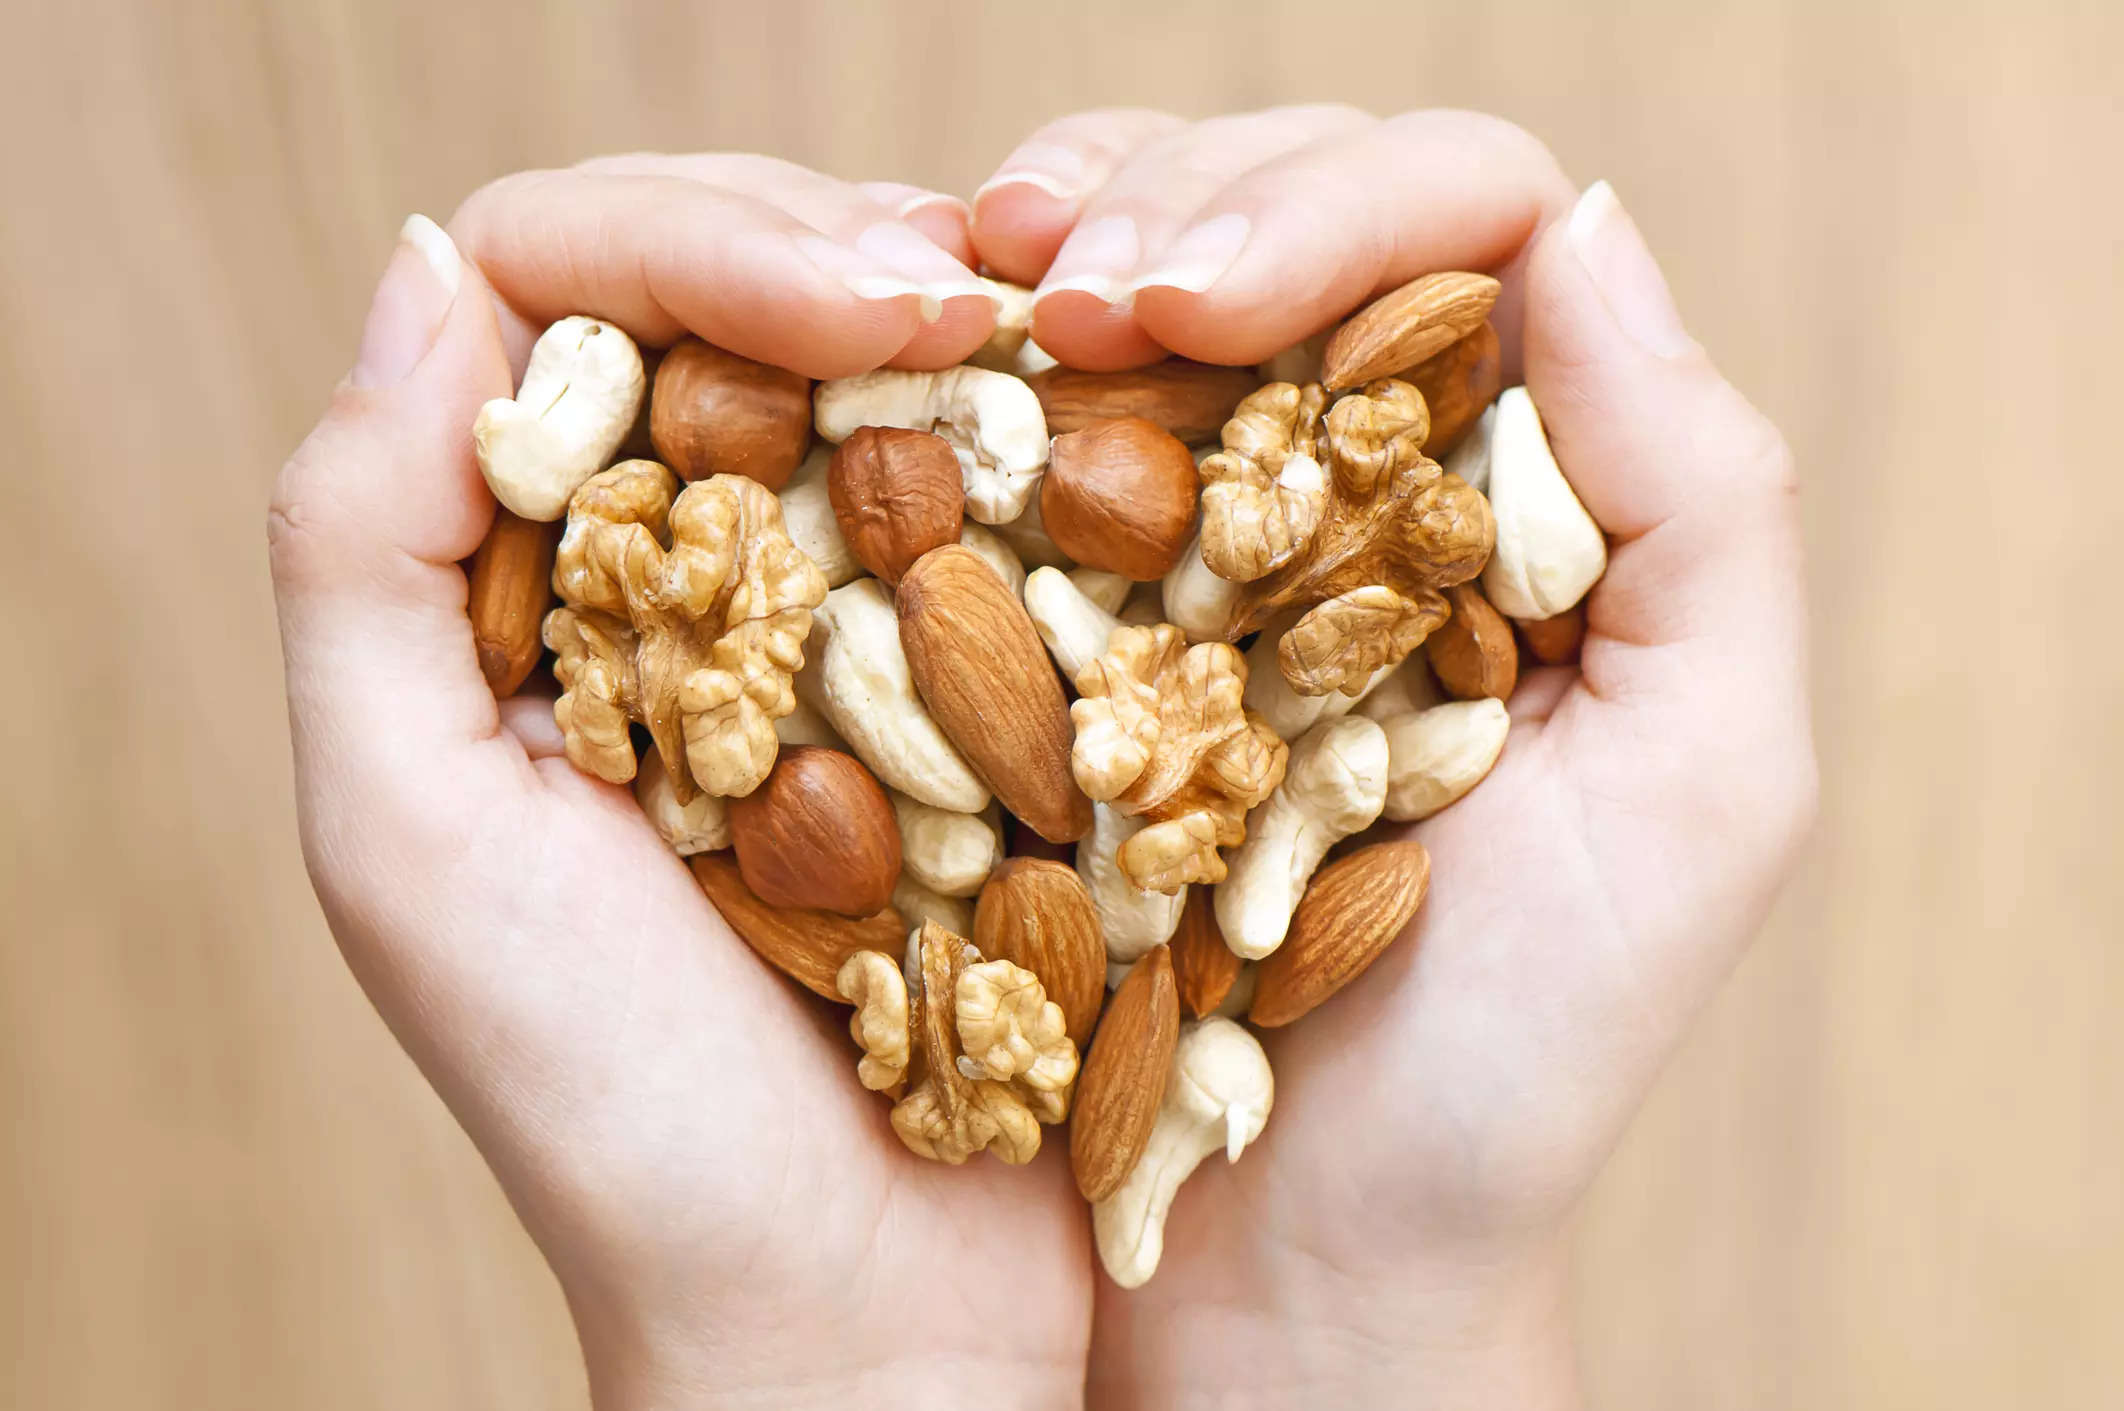 Research suggests that eating a handful of walnuts per day has the strongest benefits for brain health. This nut protects the brain cells from inflammation that may trigger Alzheimer’s.